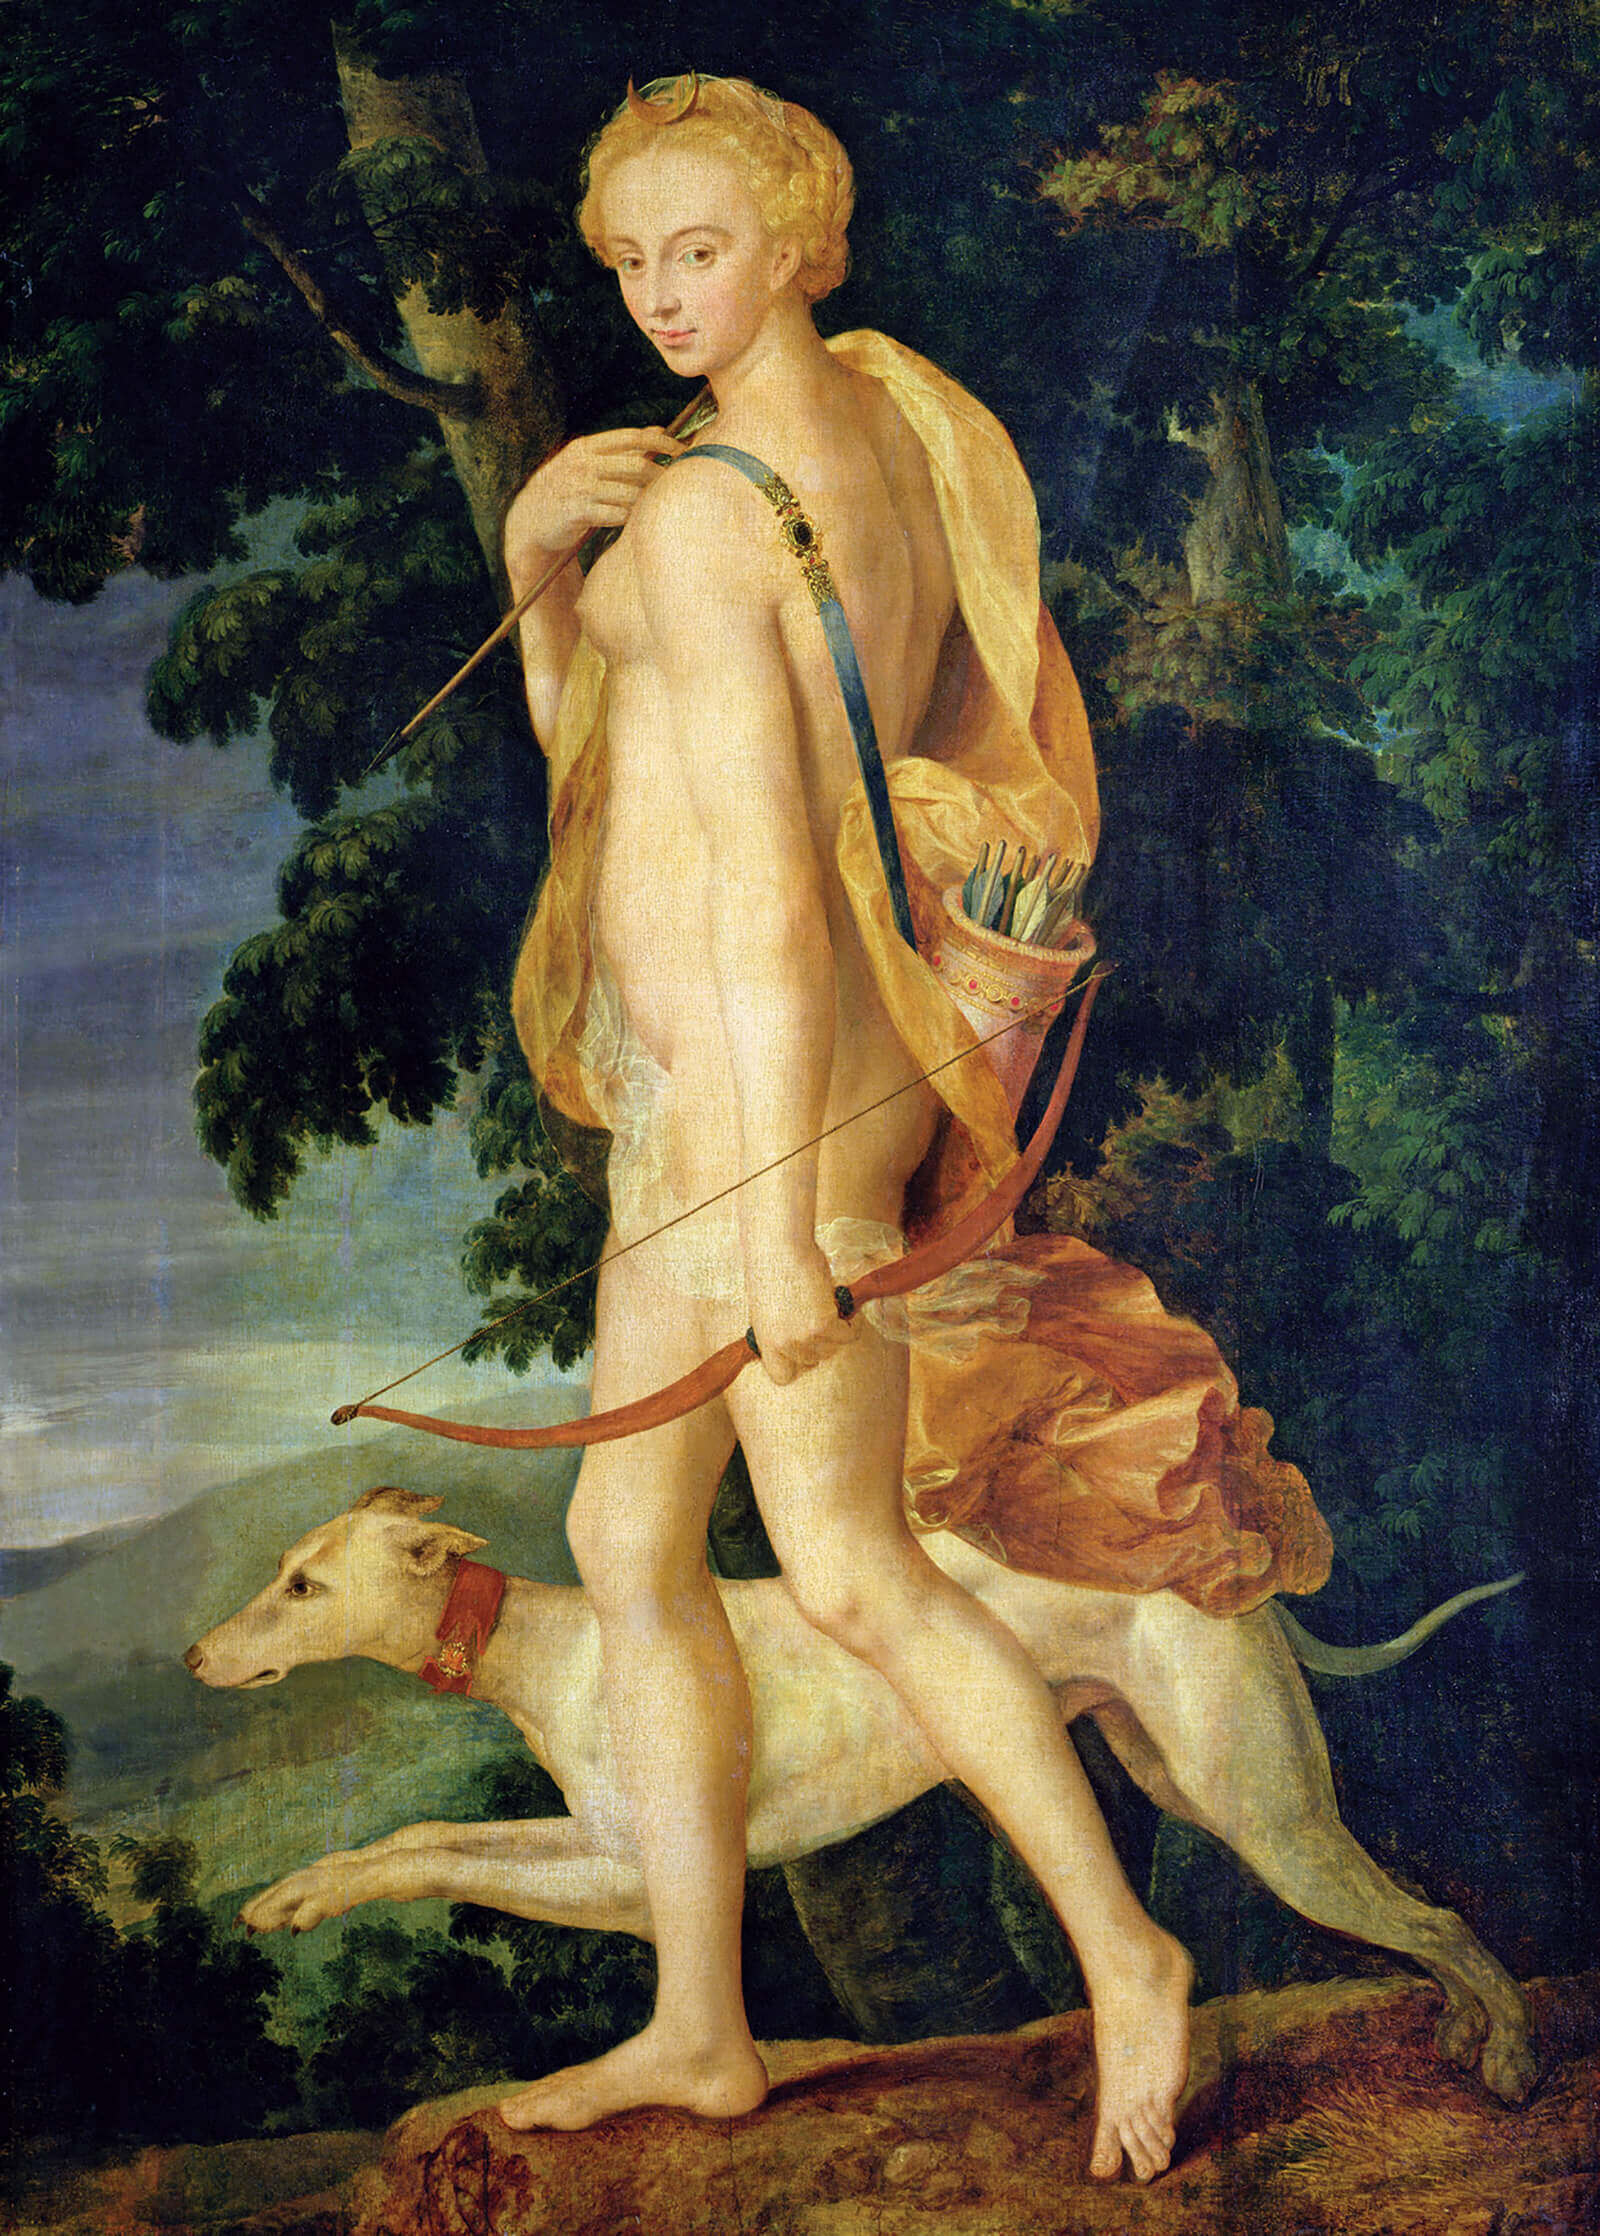 A mid-sixteenth-century painting, entitled “Diana the Huntress” attributed to the School of Fontainebleau, depicting a goddess accompanied by a greyhound.